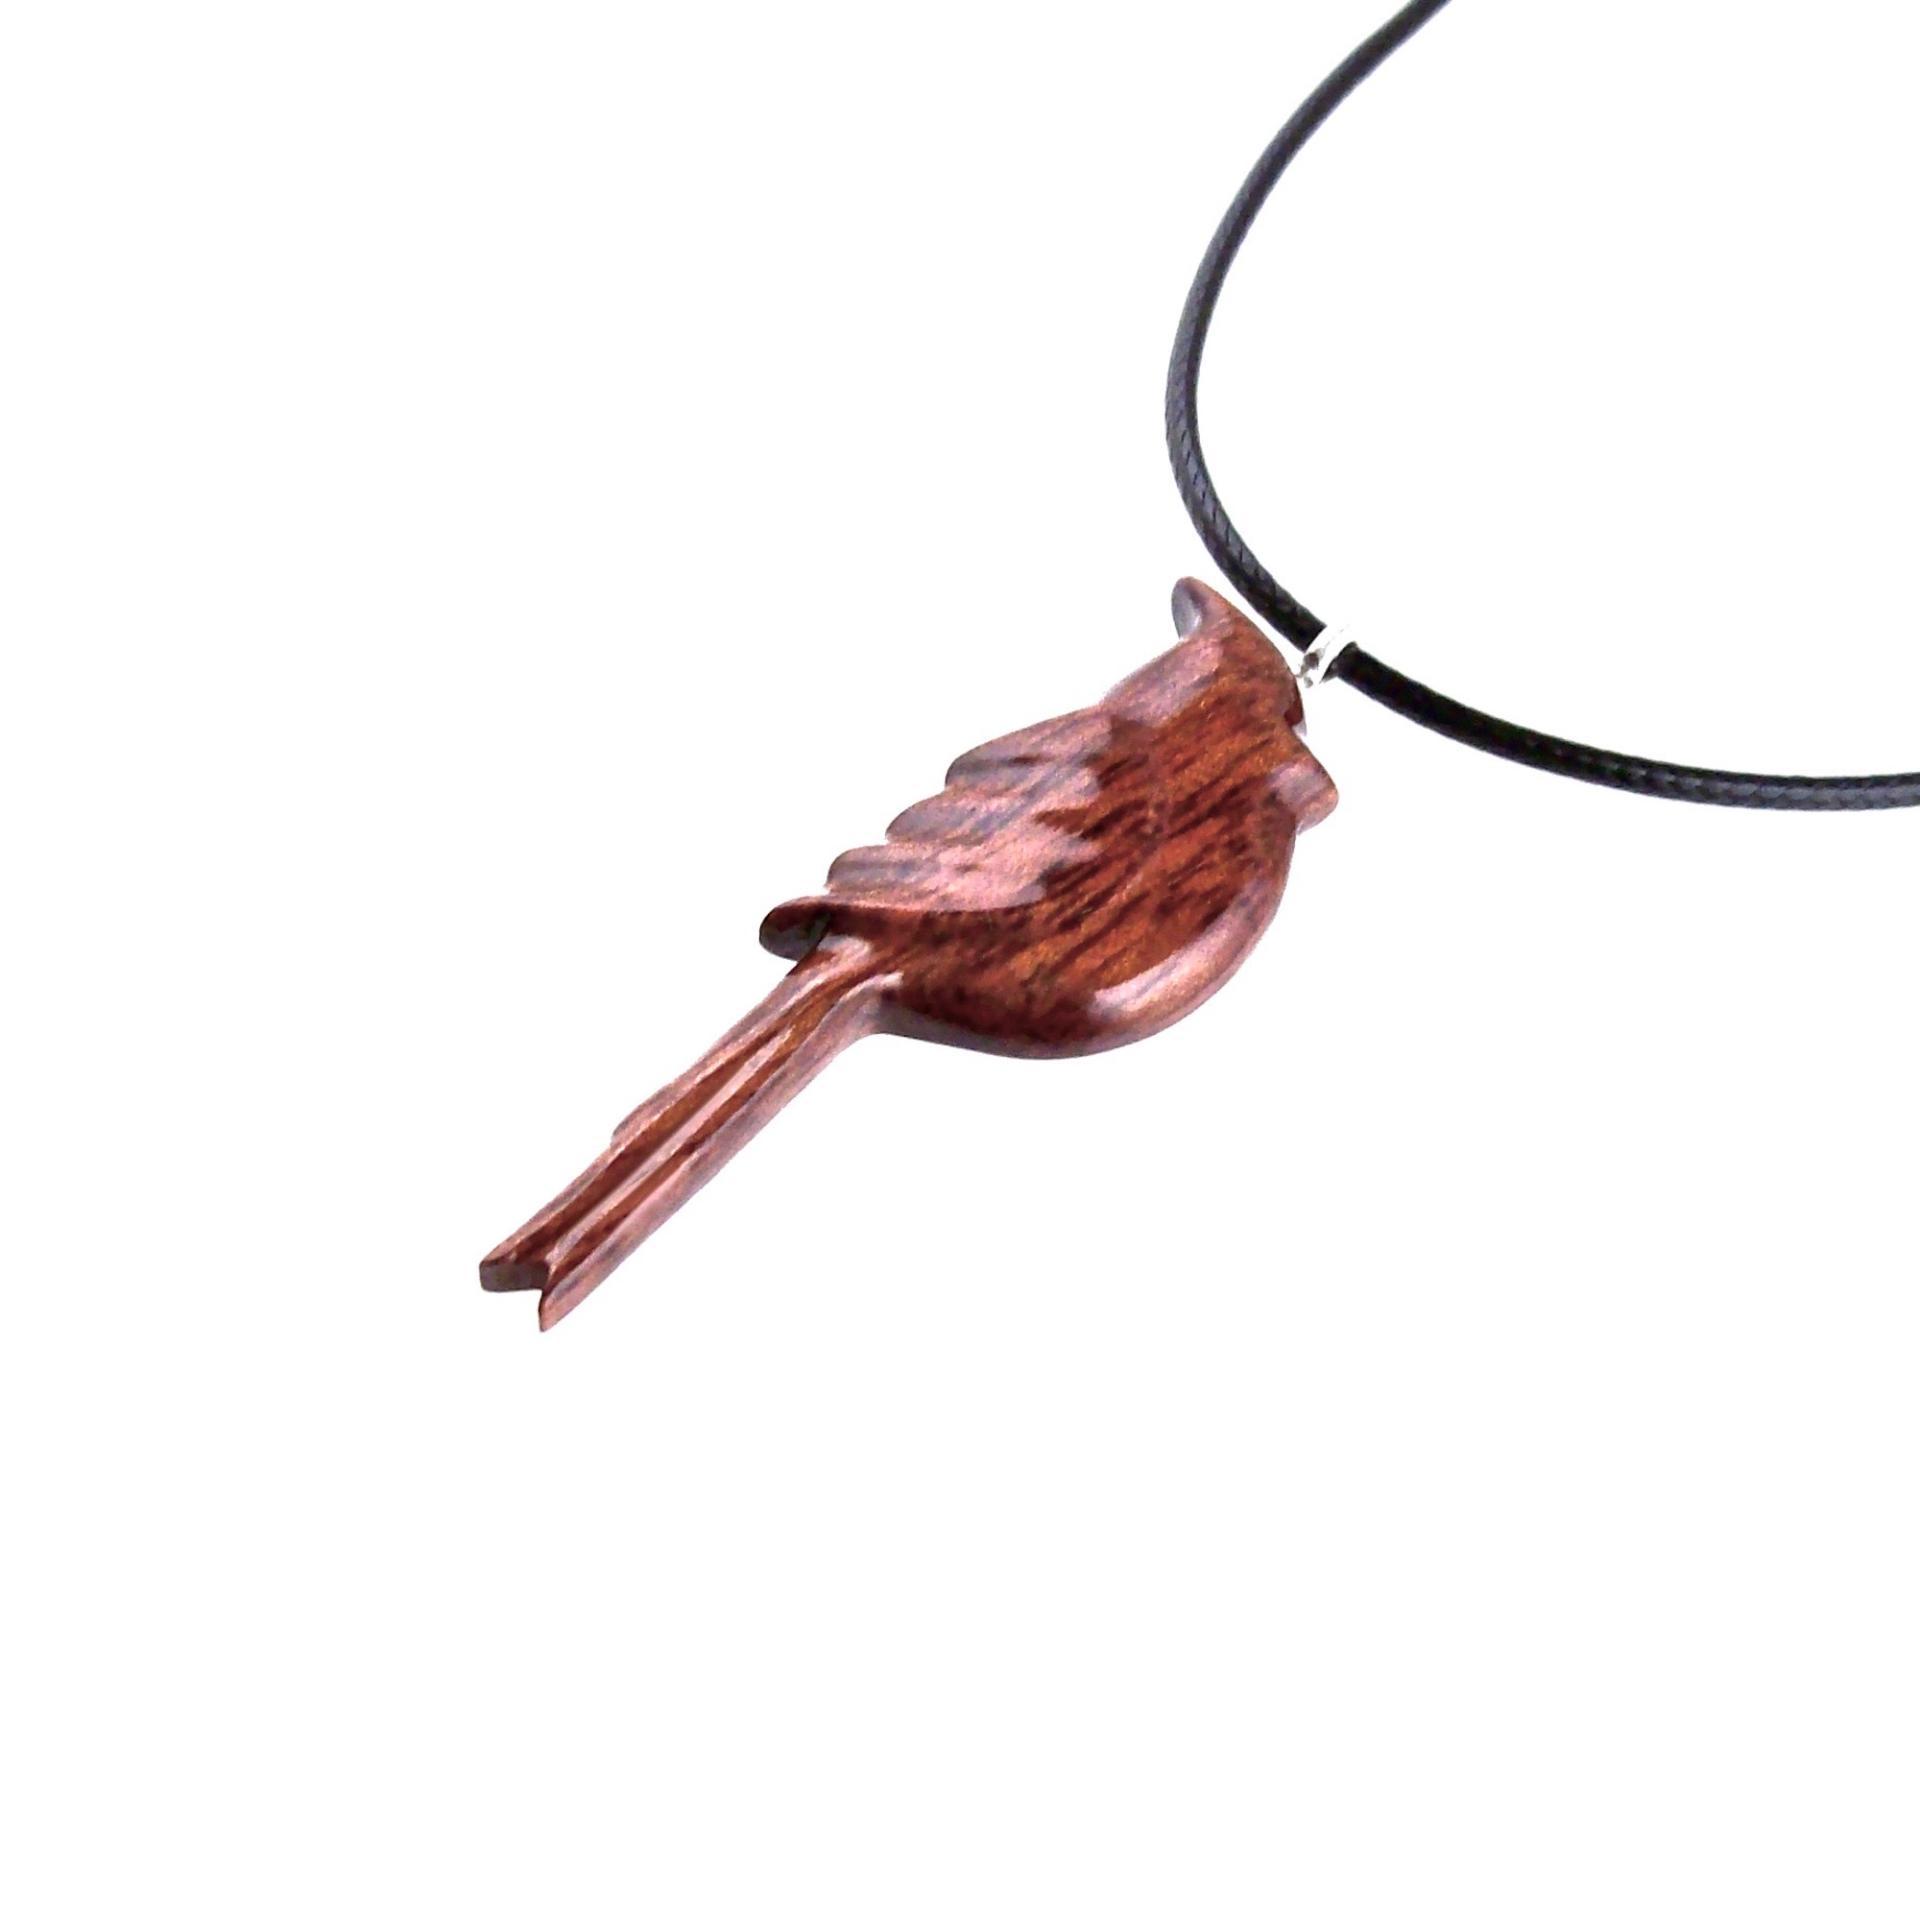 Cardinal Bird Necklace, Wooden Bird Pendant, Hand Carved Songbird Jewelry, One of a Kind Wood Jewelry Gift for Her